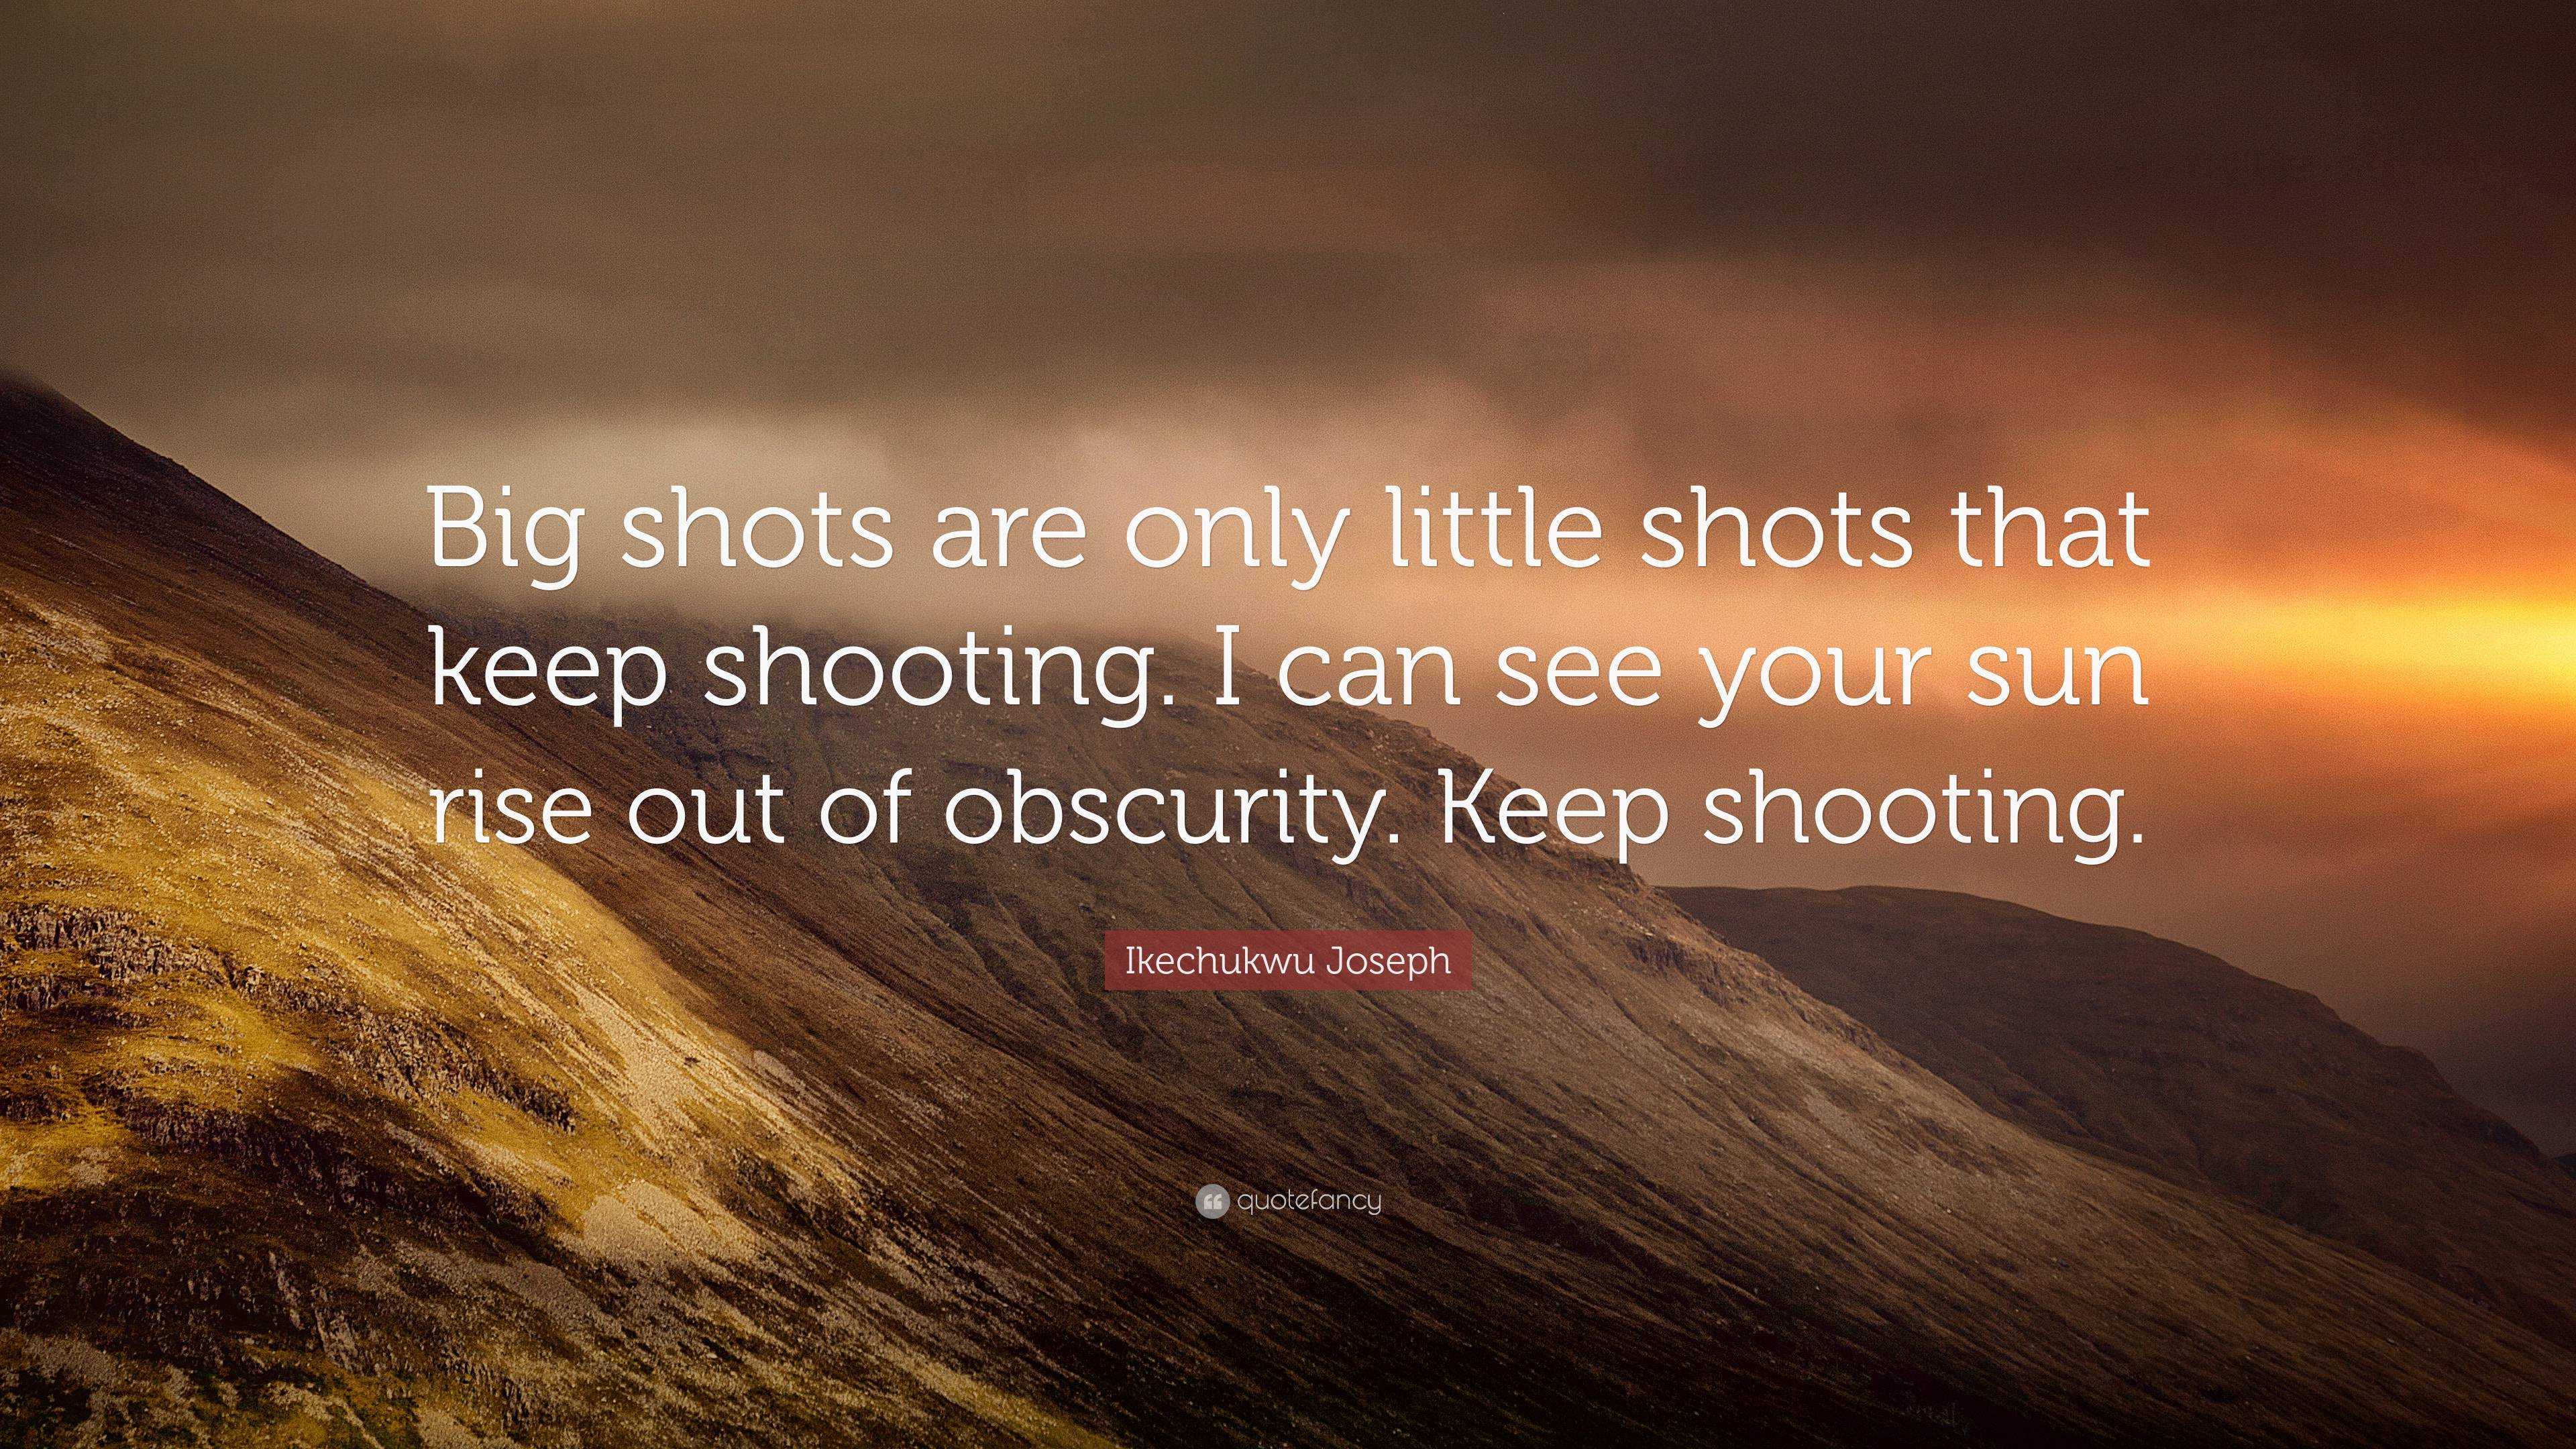 BIG SHOTS ARE ONLY LITTLE SHOTS WHO KEEP SHOOTING